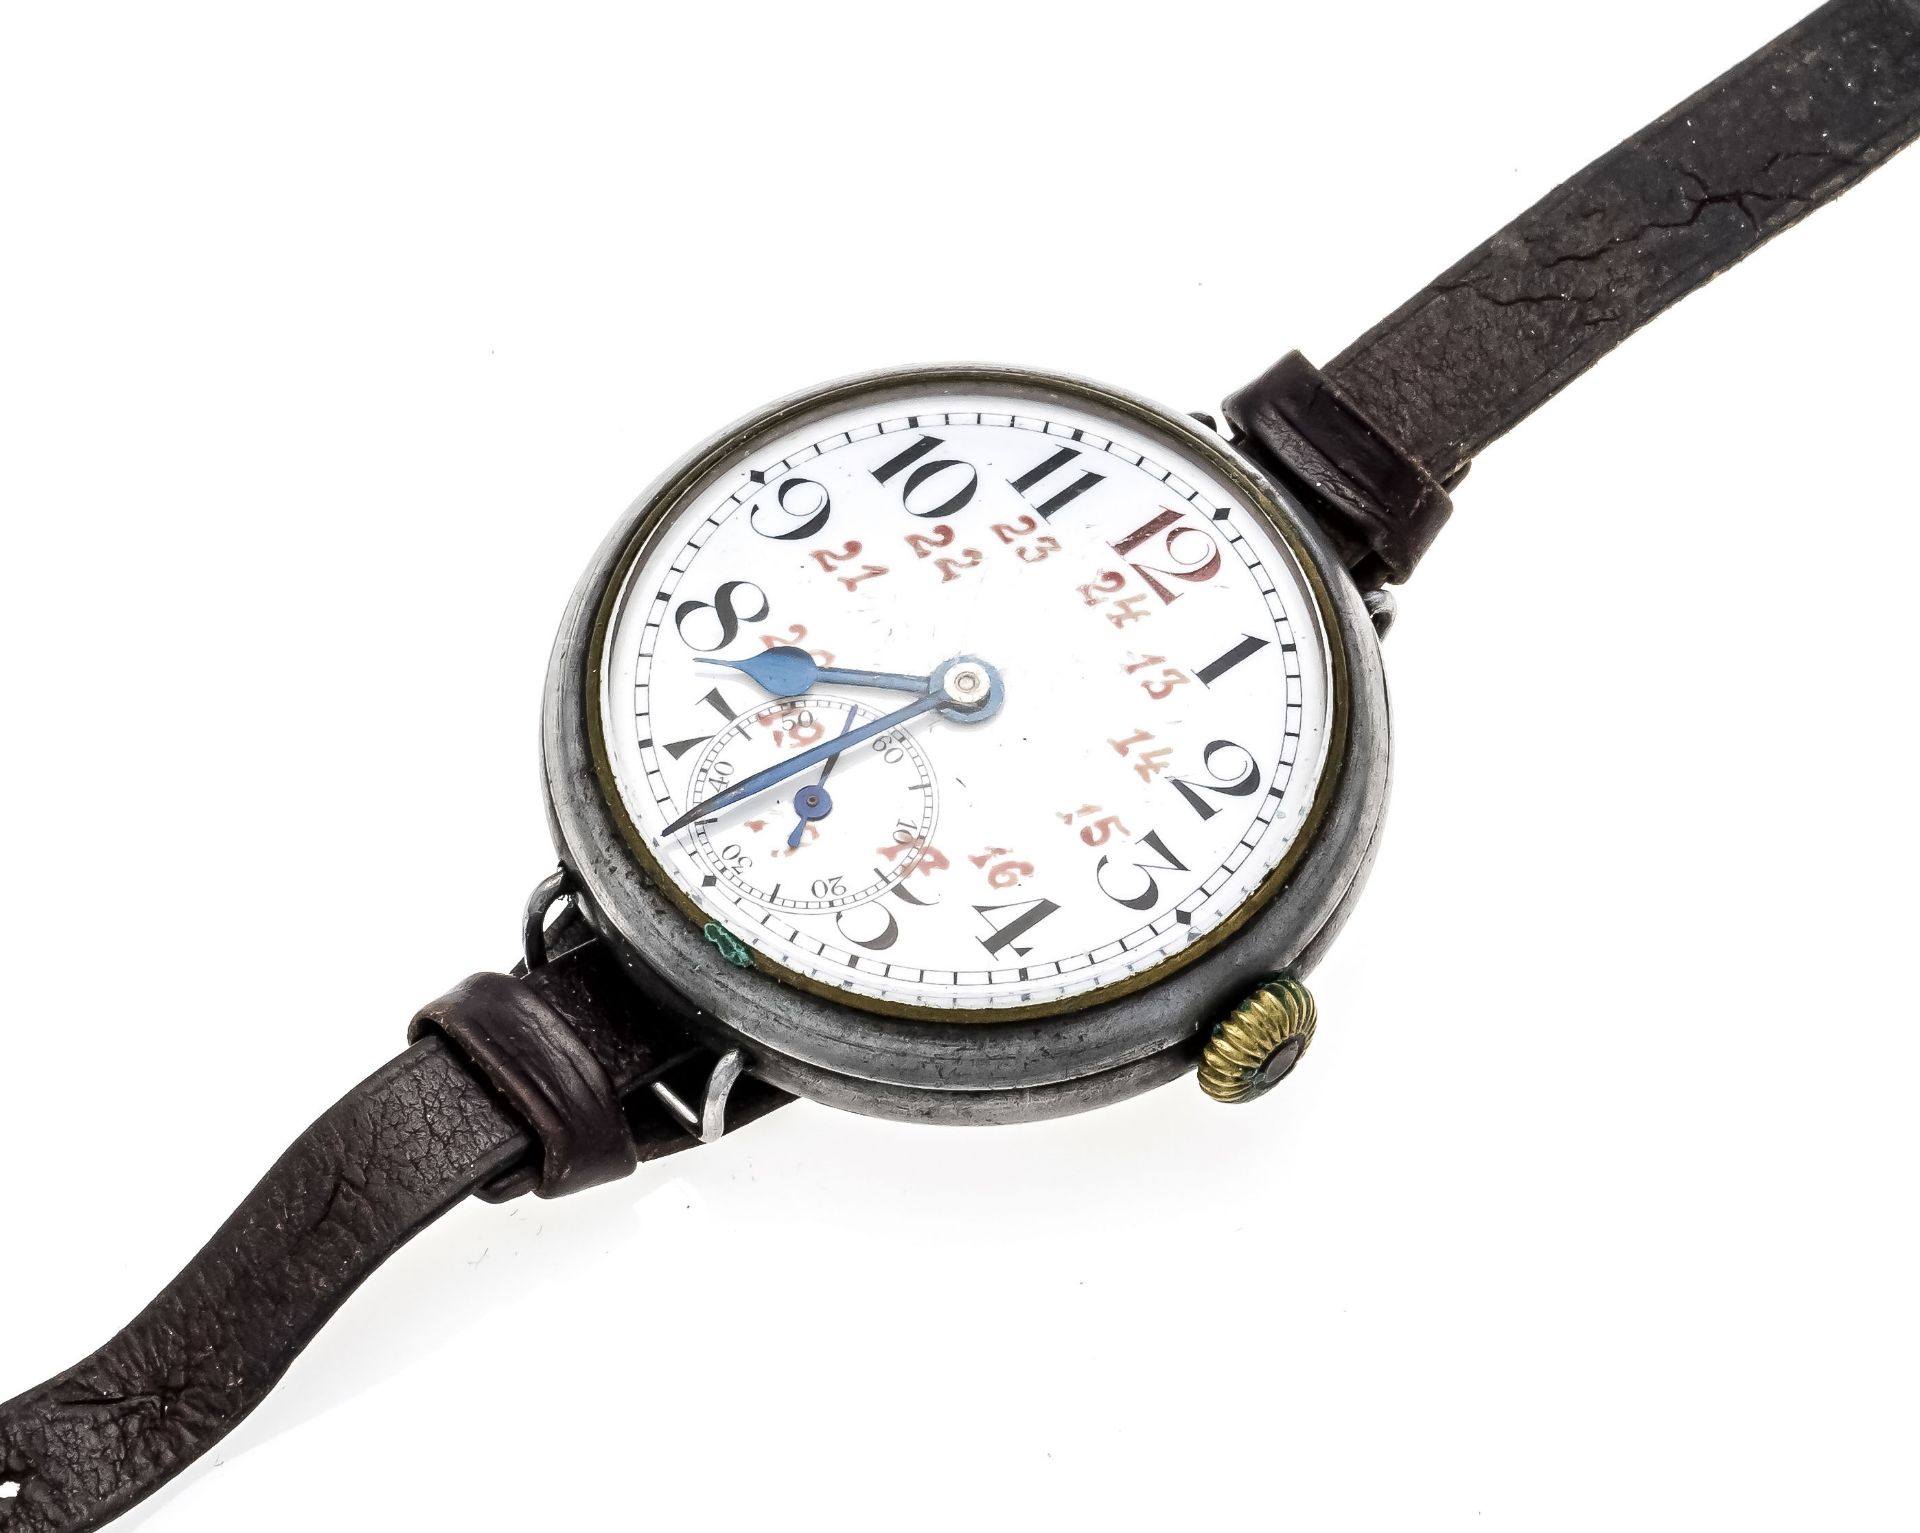 Men's watch in burnished steel case, circa 1920, white enamel dial with black Arabic numerals and